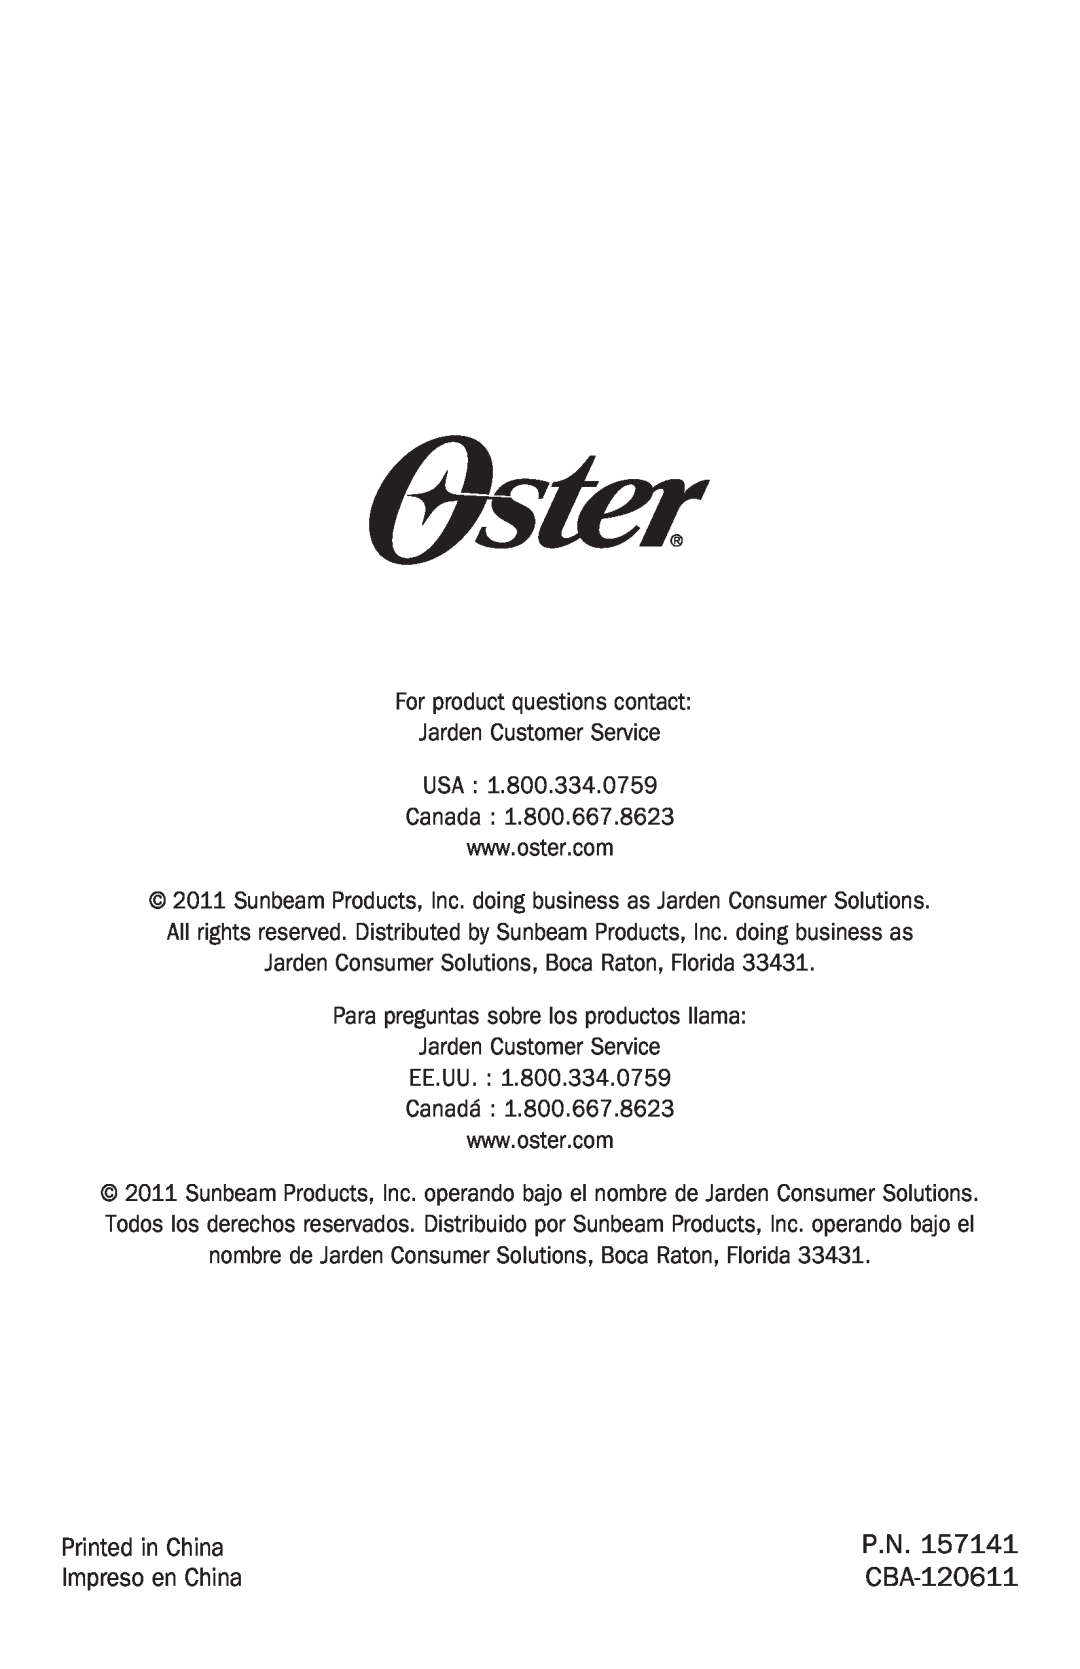 Oster TSSTRTS2S2 user manual Printed in China, Impreso en China, CBA-120611, EE.UU Canadá 